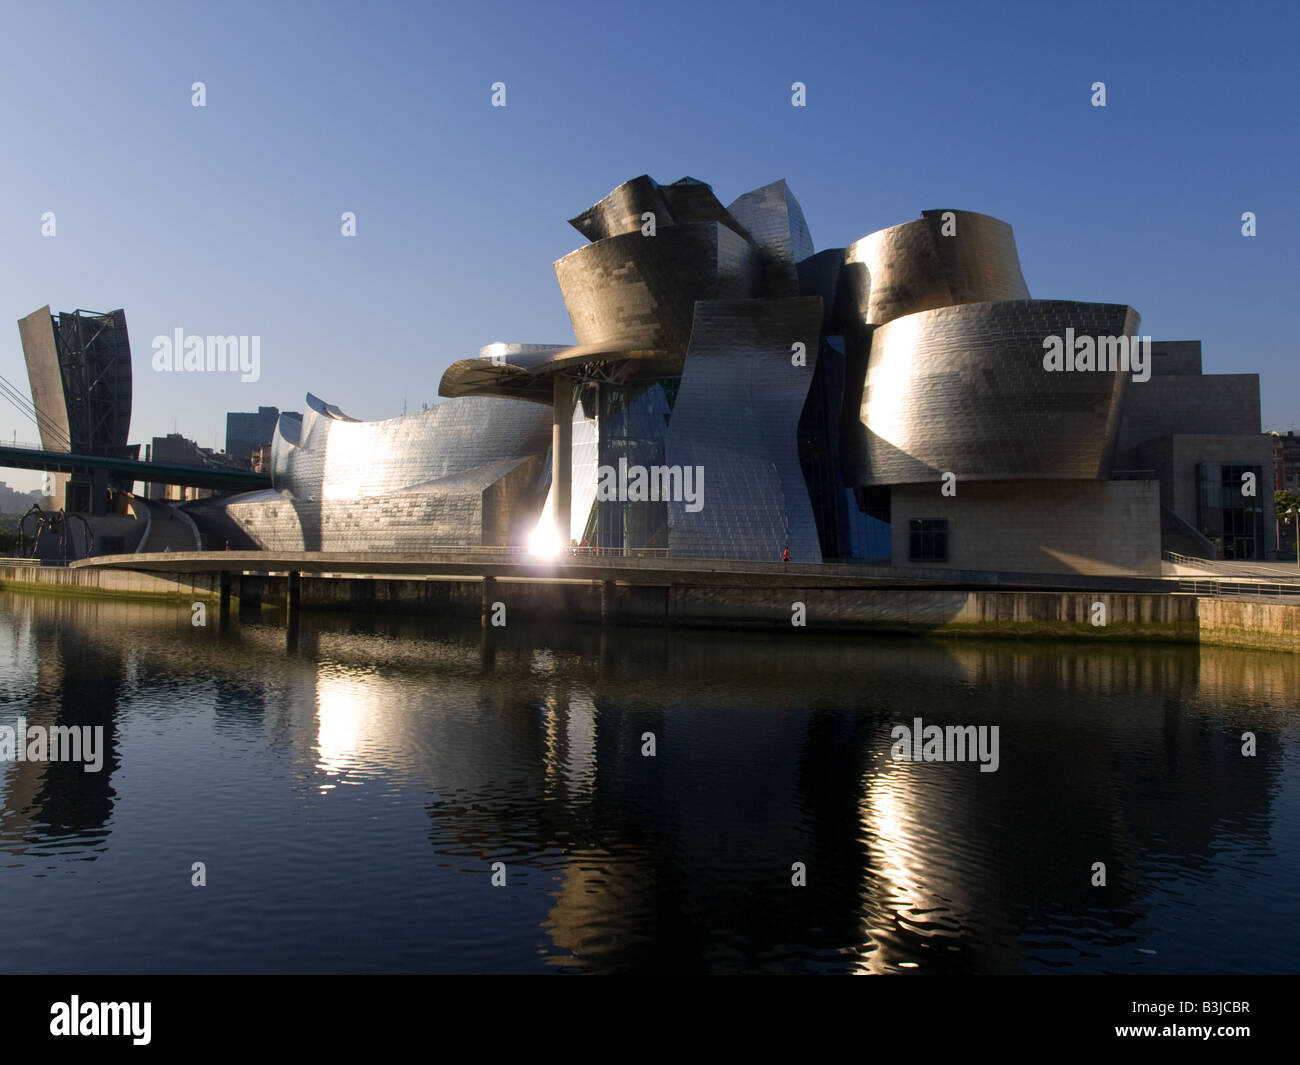 The magnificent Guggenheim Museum Bilbao, by Canadian architect Frank O. Gehry. Stock Photo